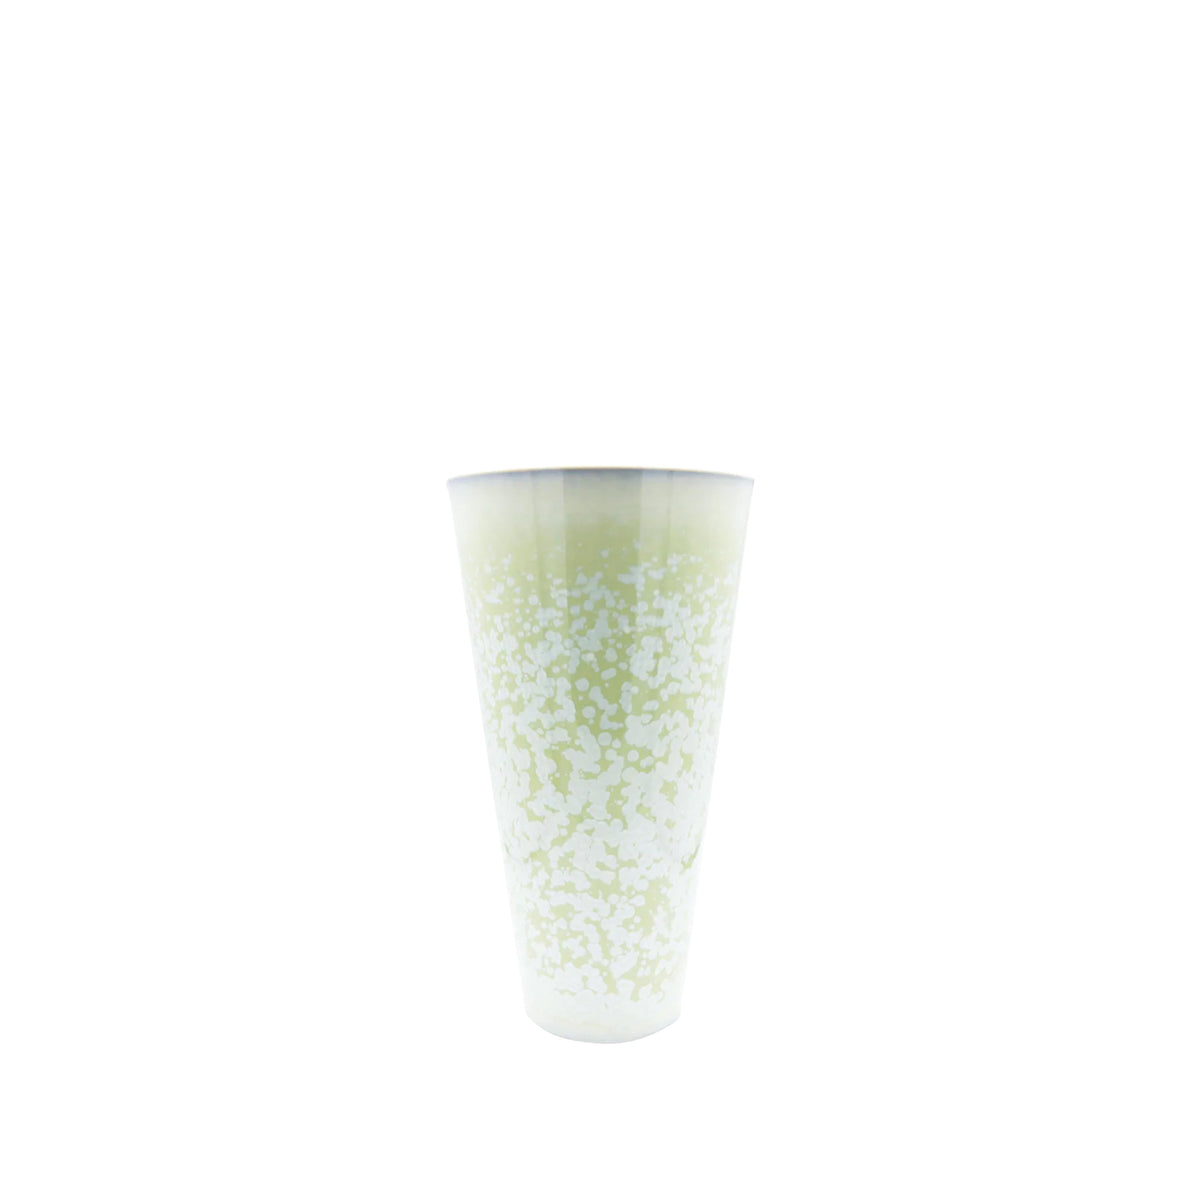 SONG Almond - Straight vase, small